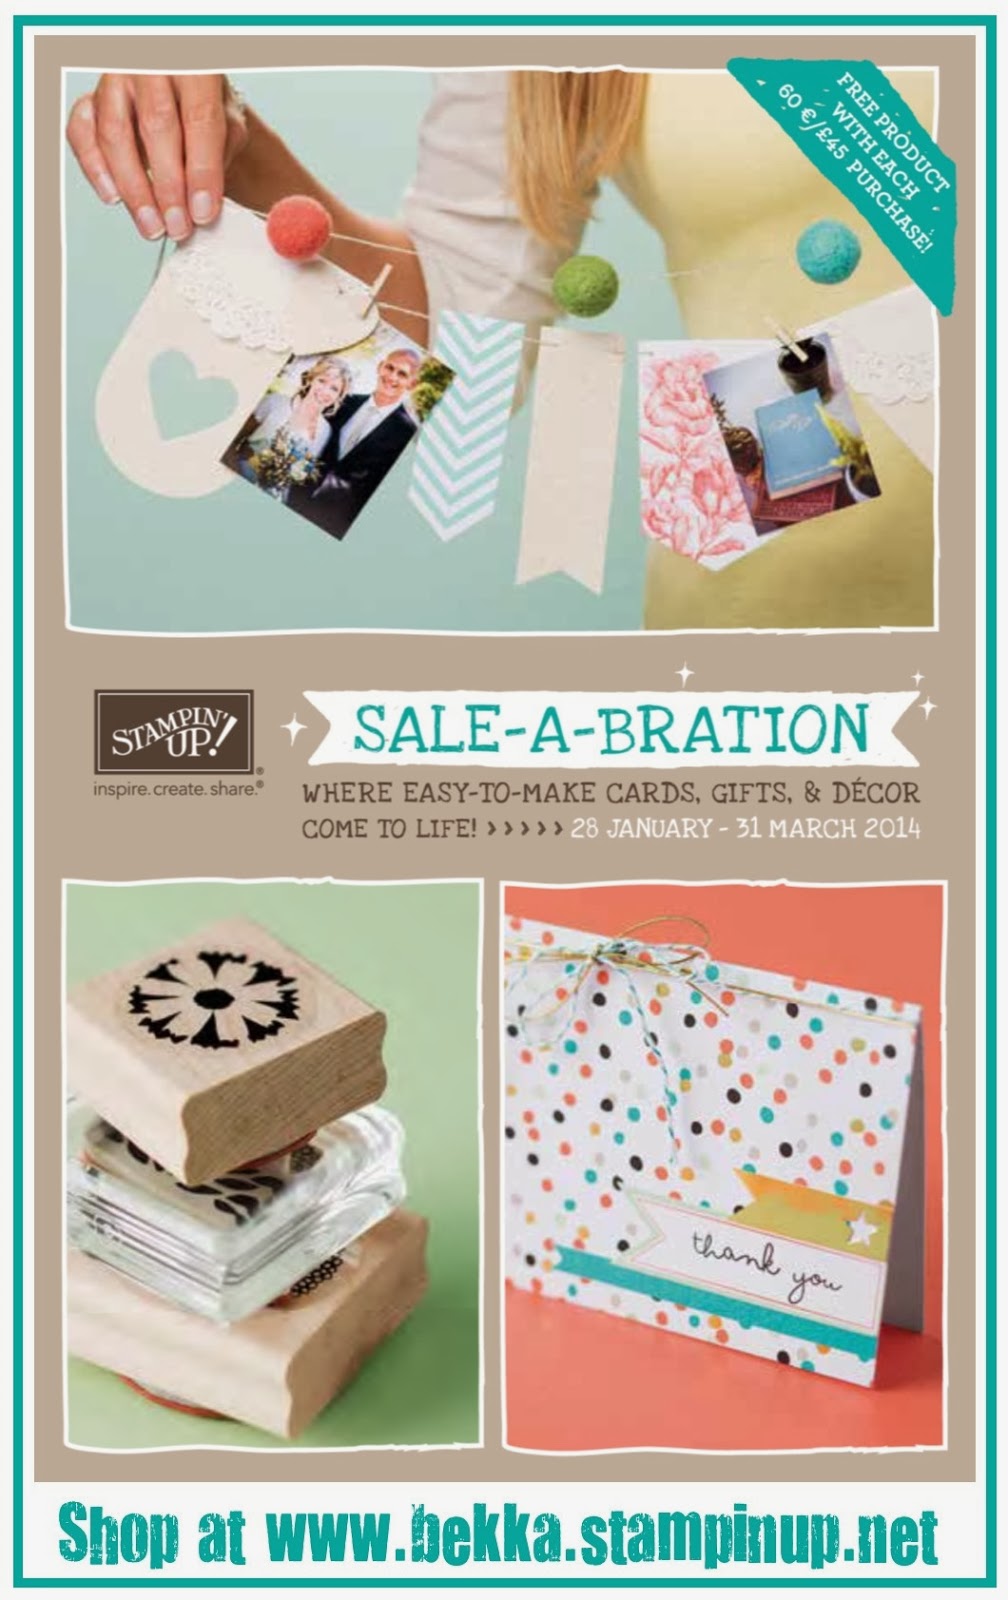 Earn free products from this brochure when you shop at www.bekka.stampinup.net before 31 March 2014